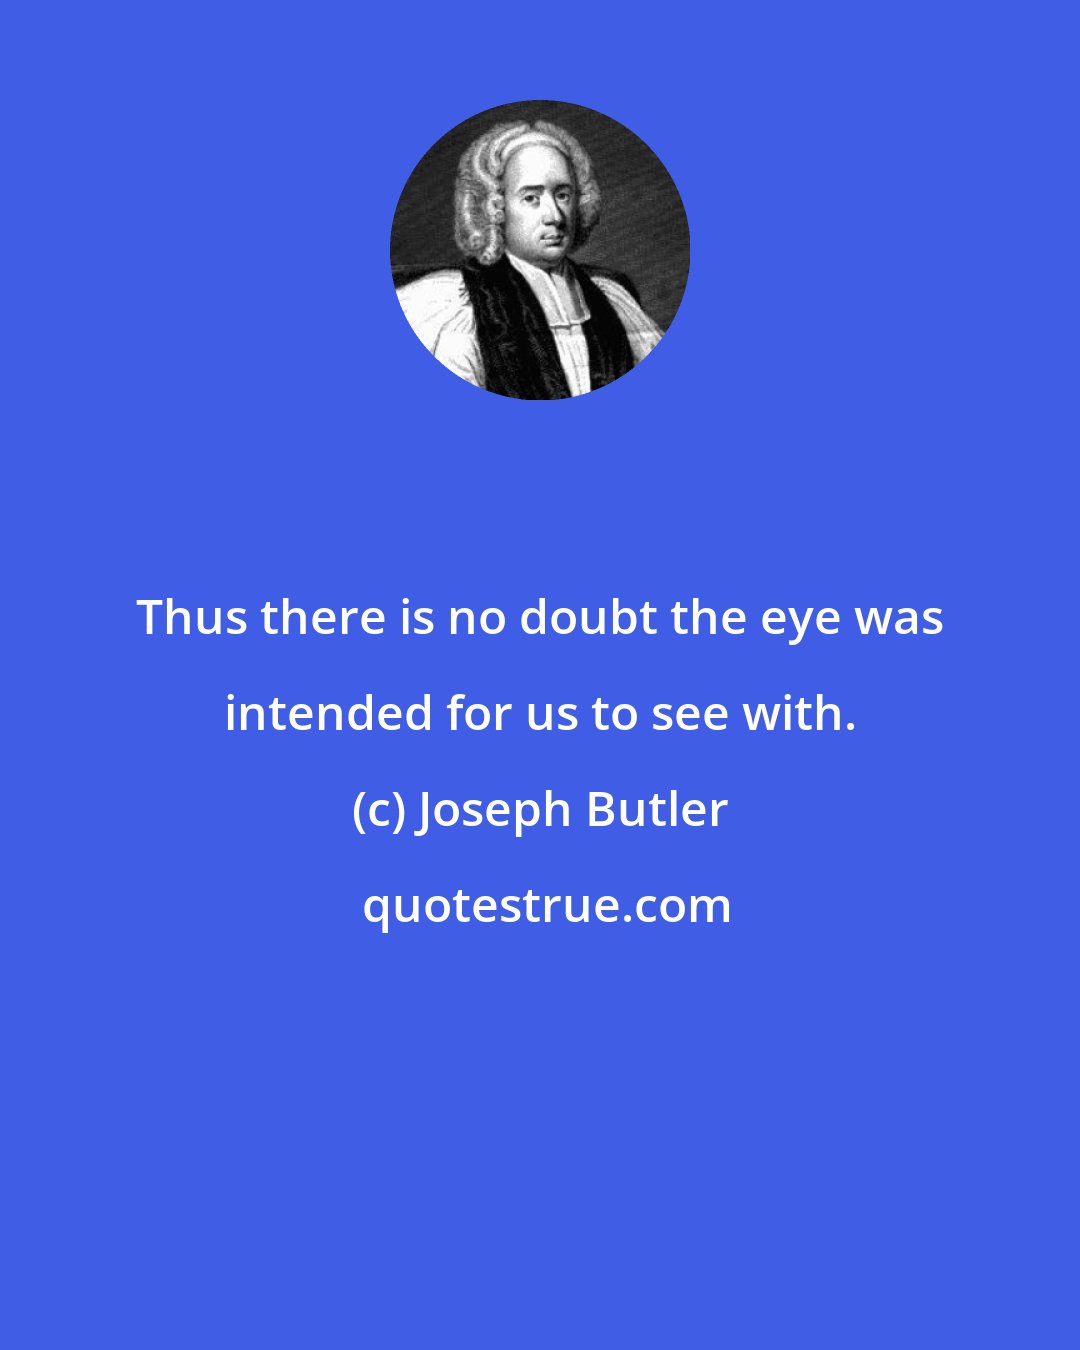 Joseph Butler: Thus there is no doubt the eye was intended for us to see with.